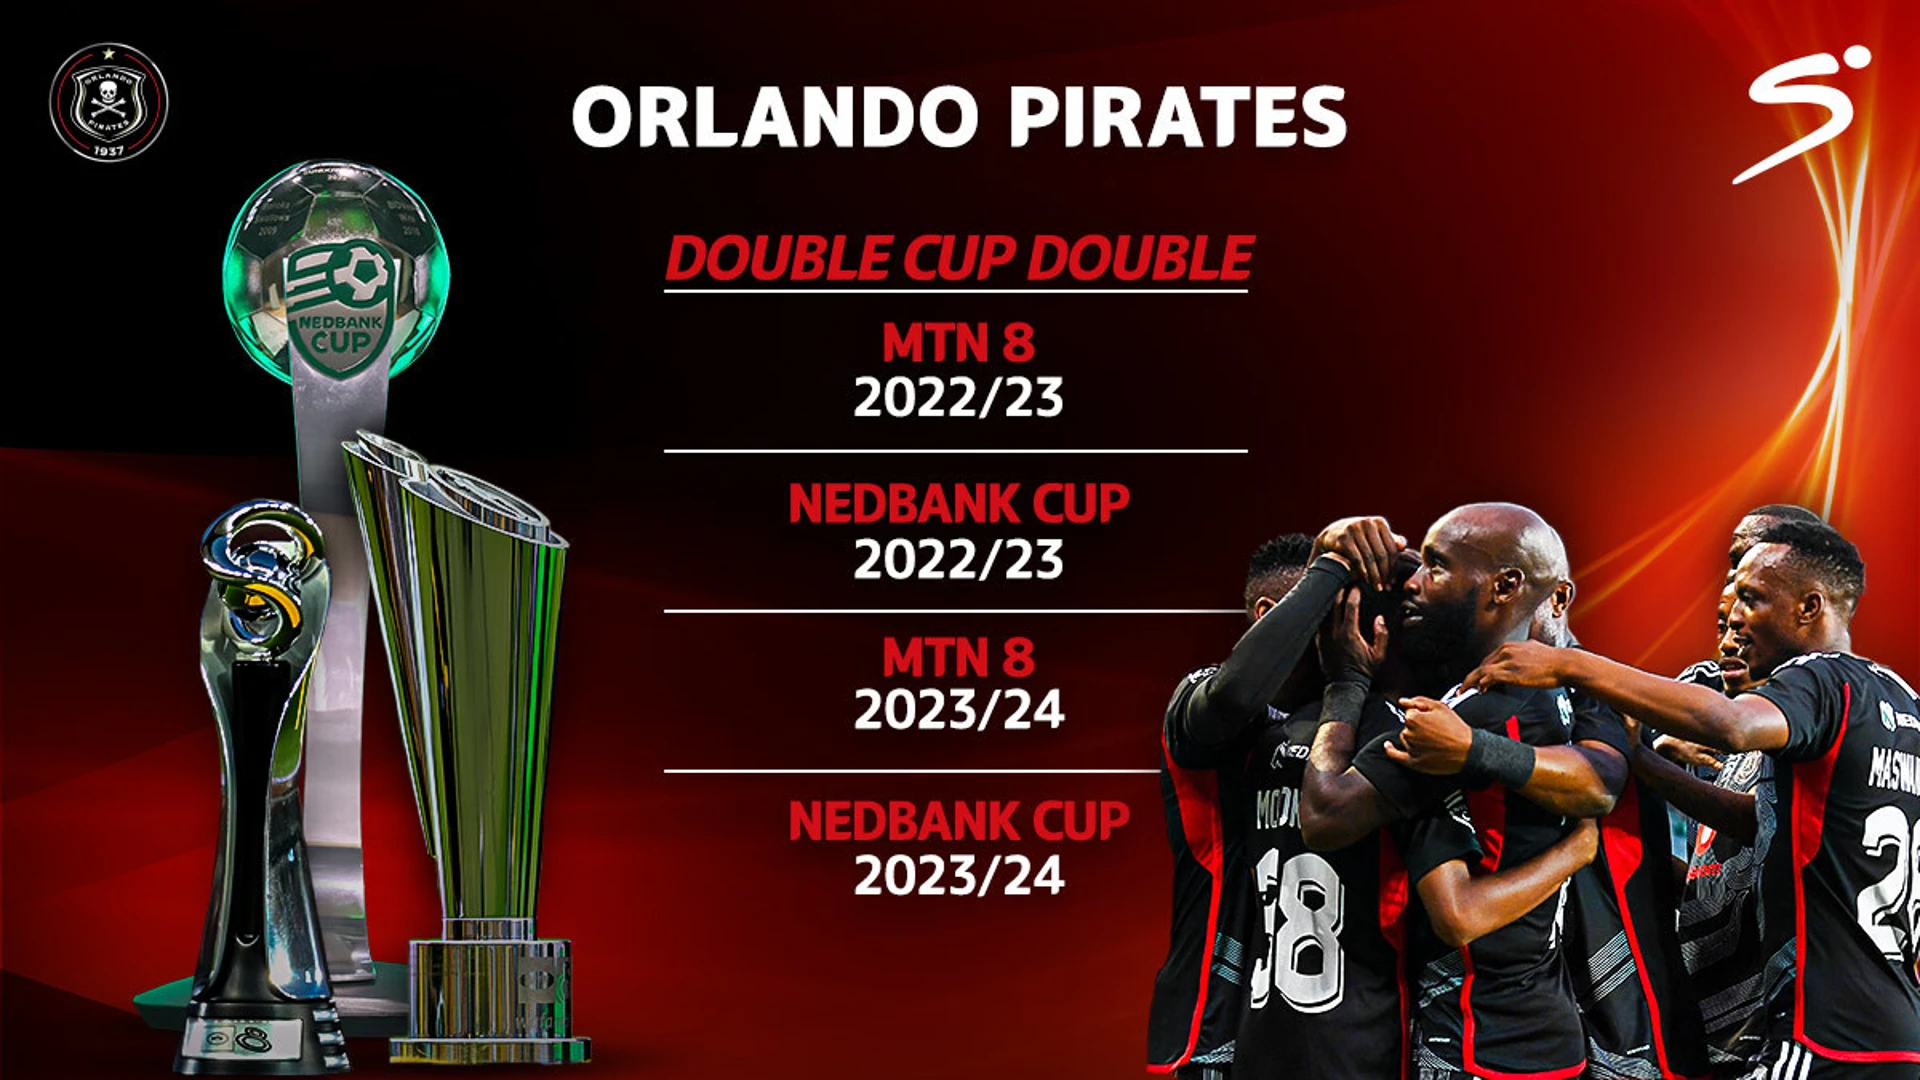 Pirates cup double in historic perspective